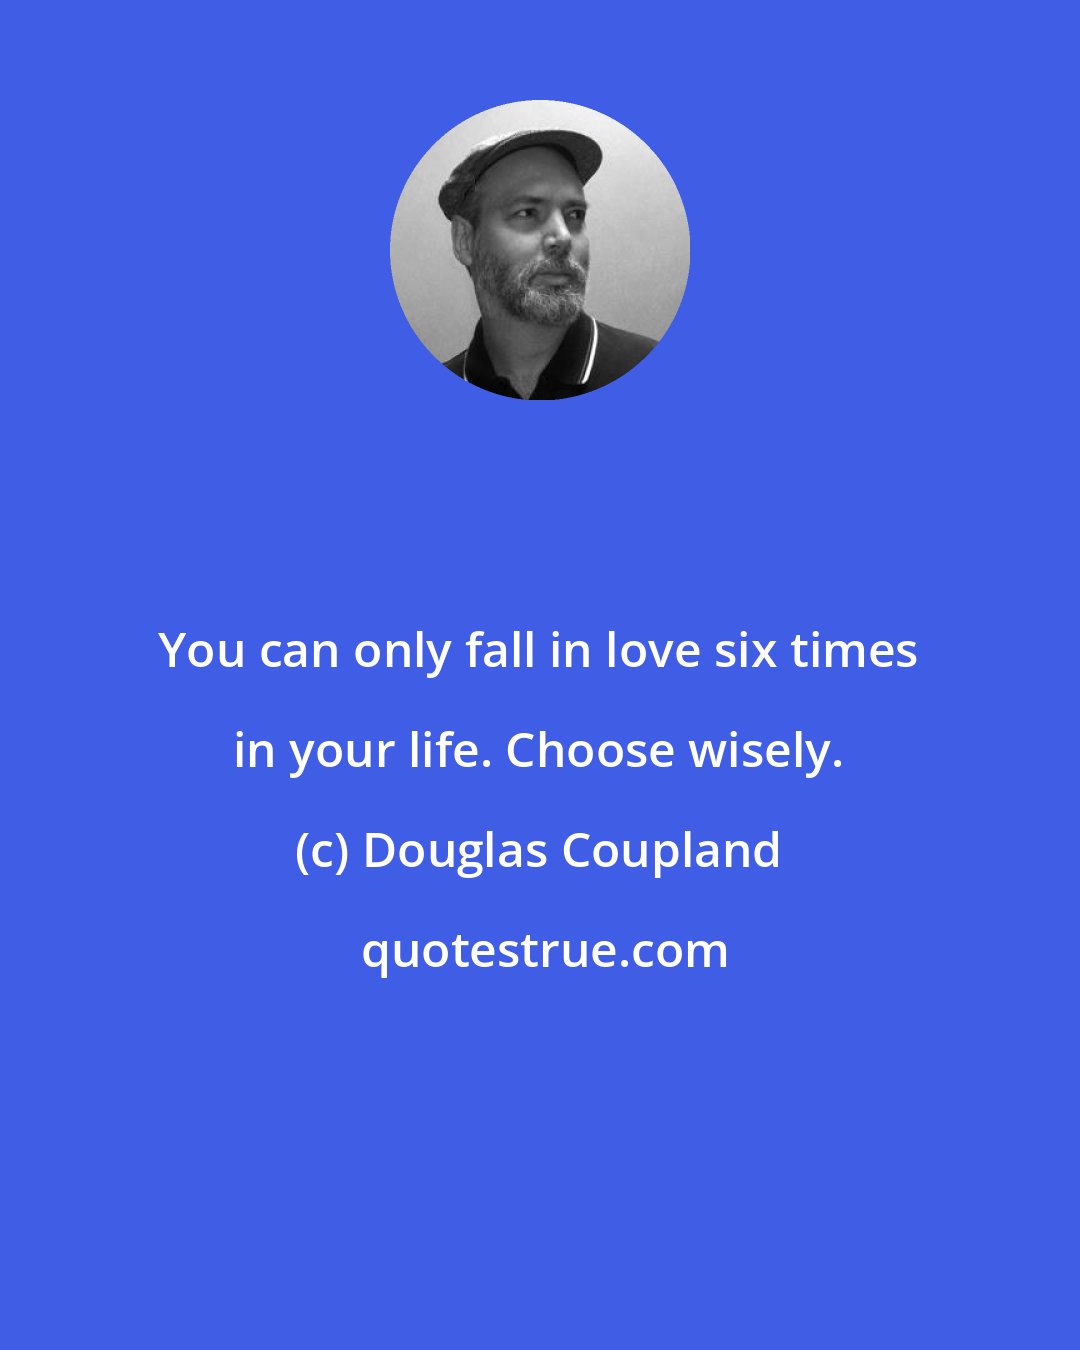 Douglas Coupland: You can only fall in love six times in your life. Choose wisely.